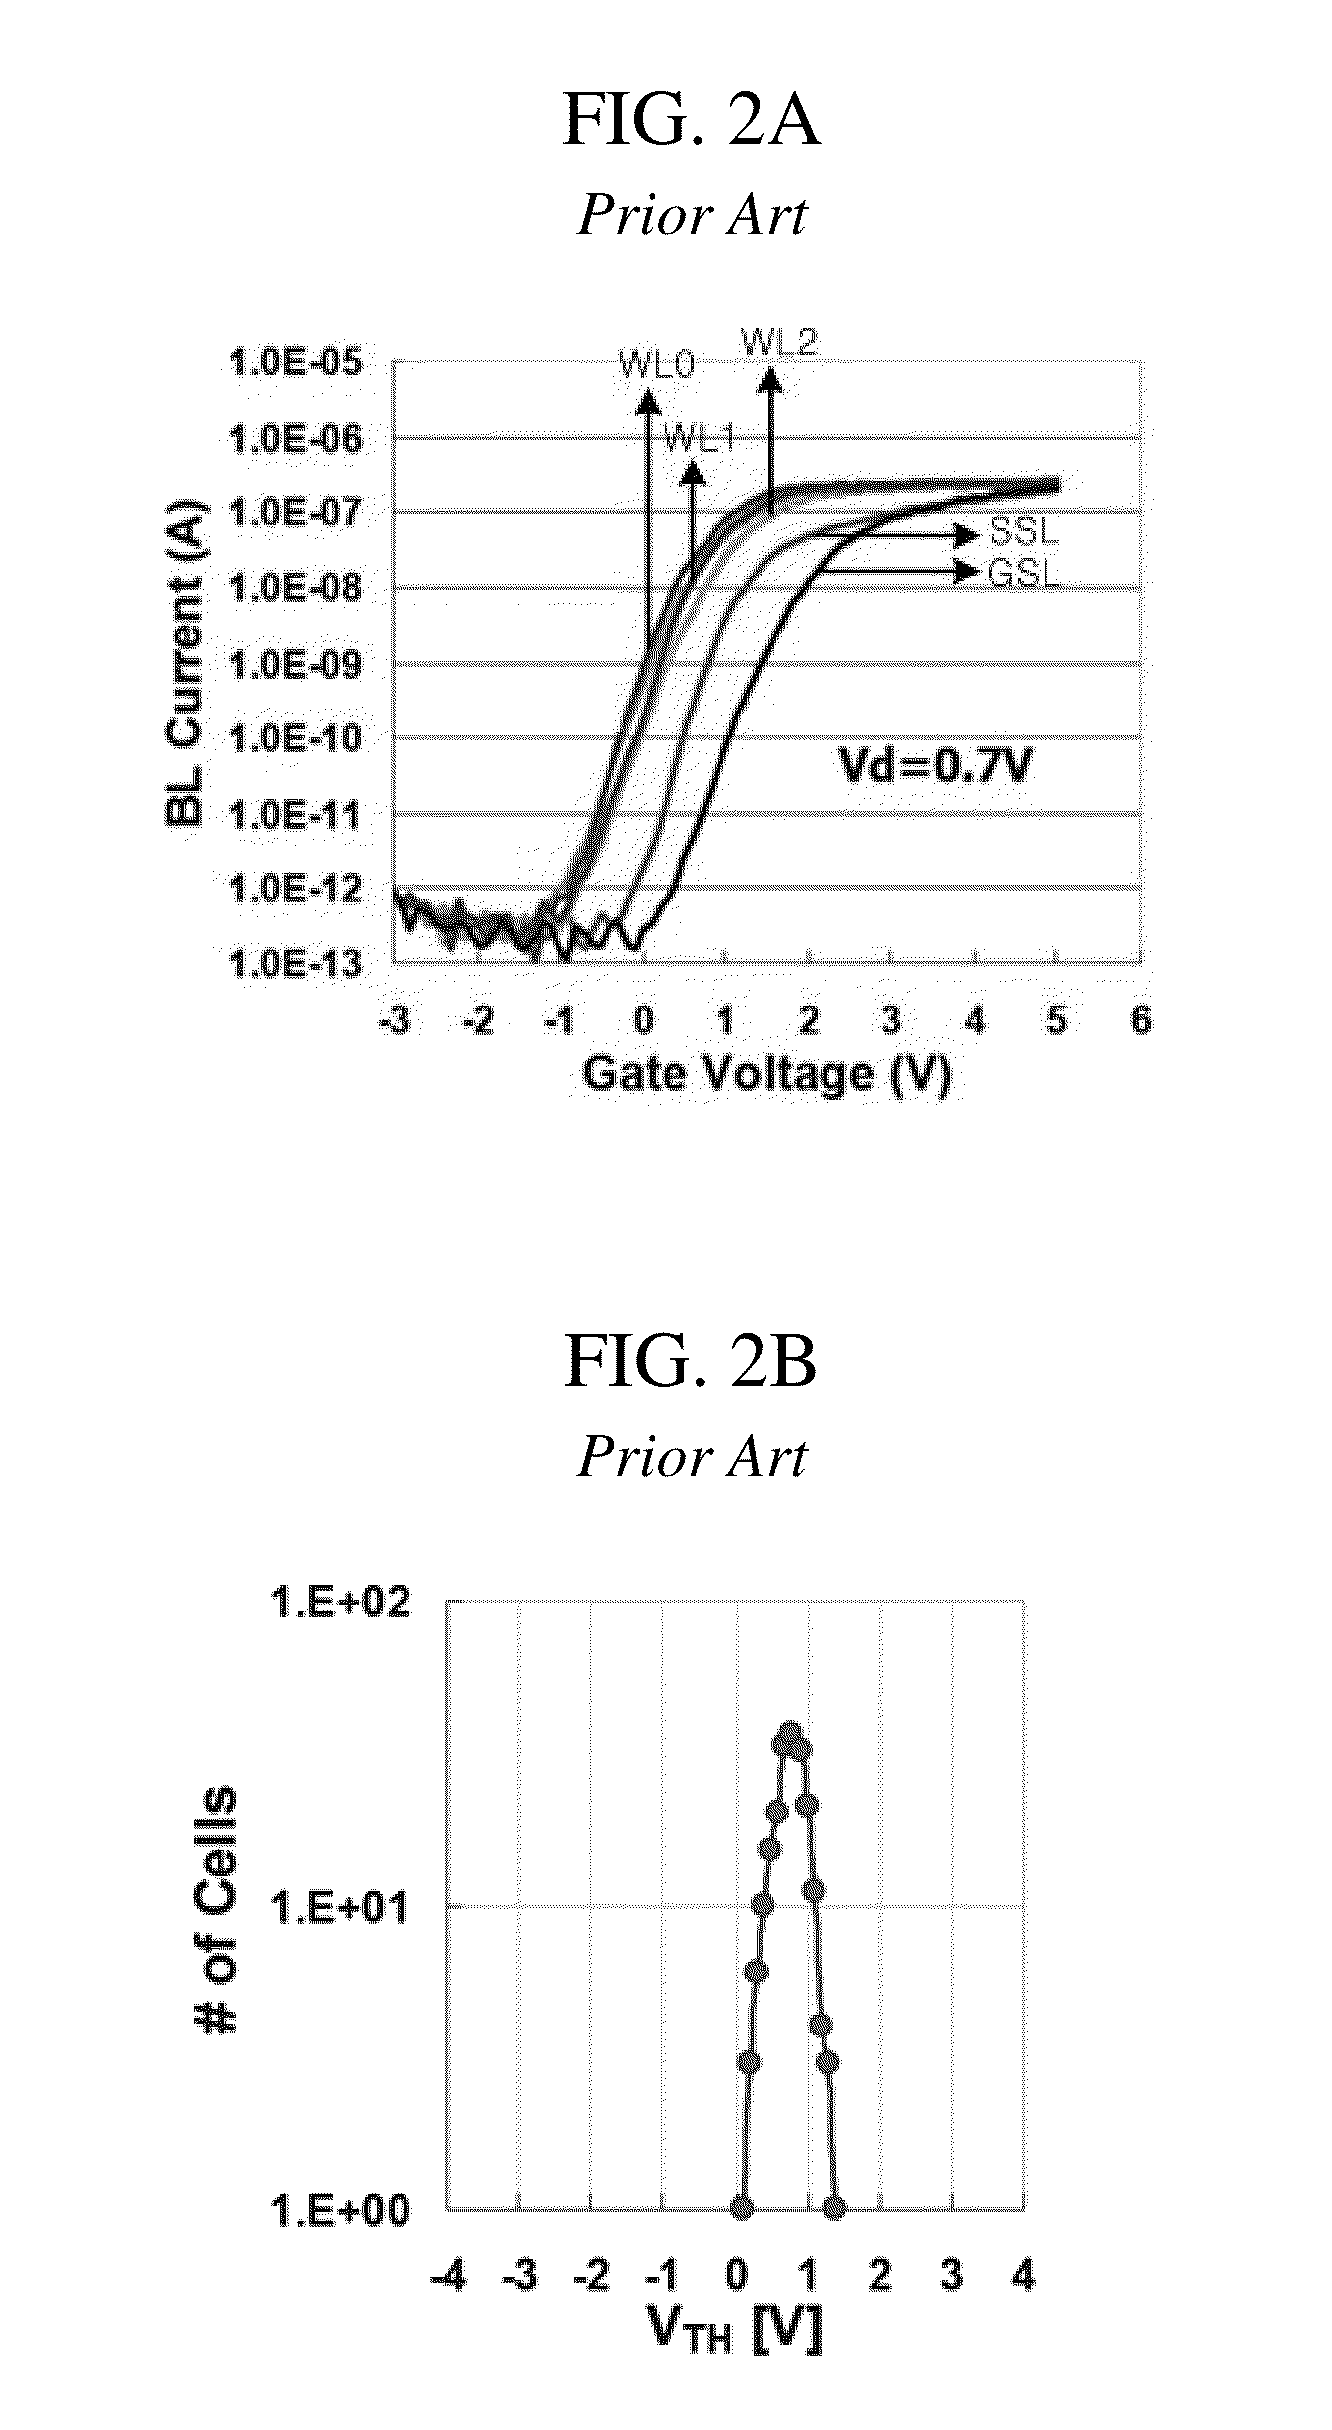 Cell string and reading method for the cell string